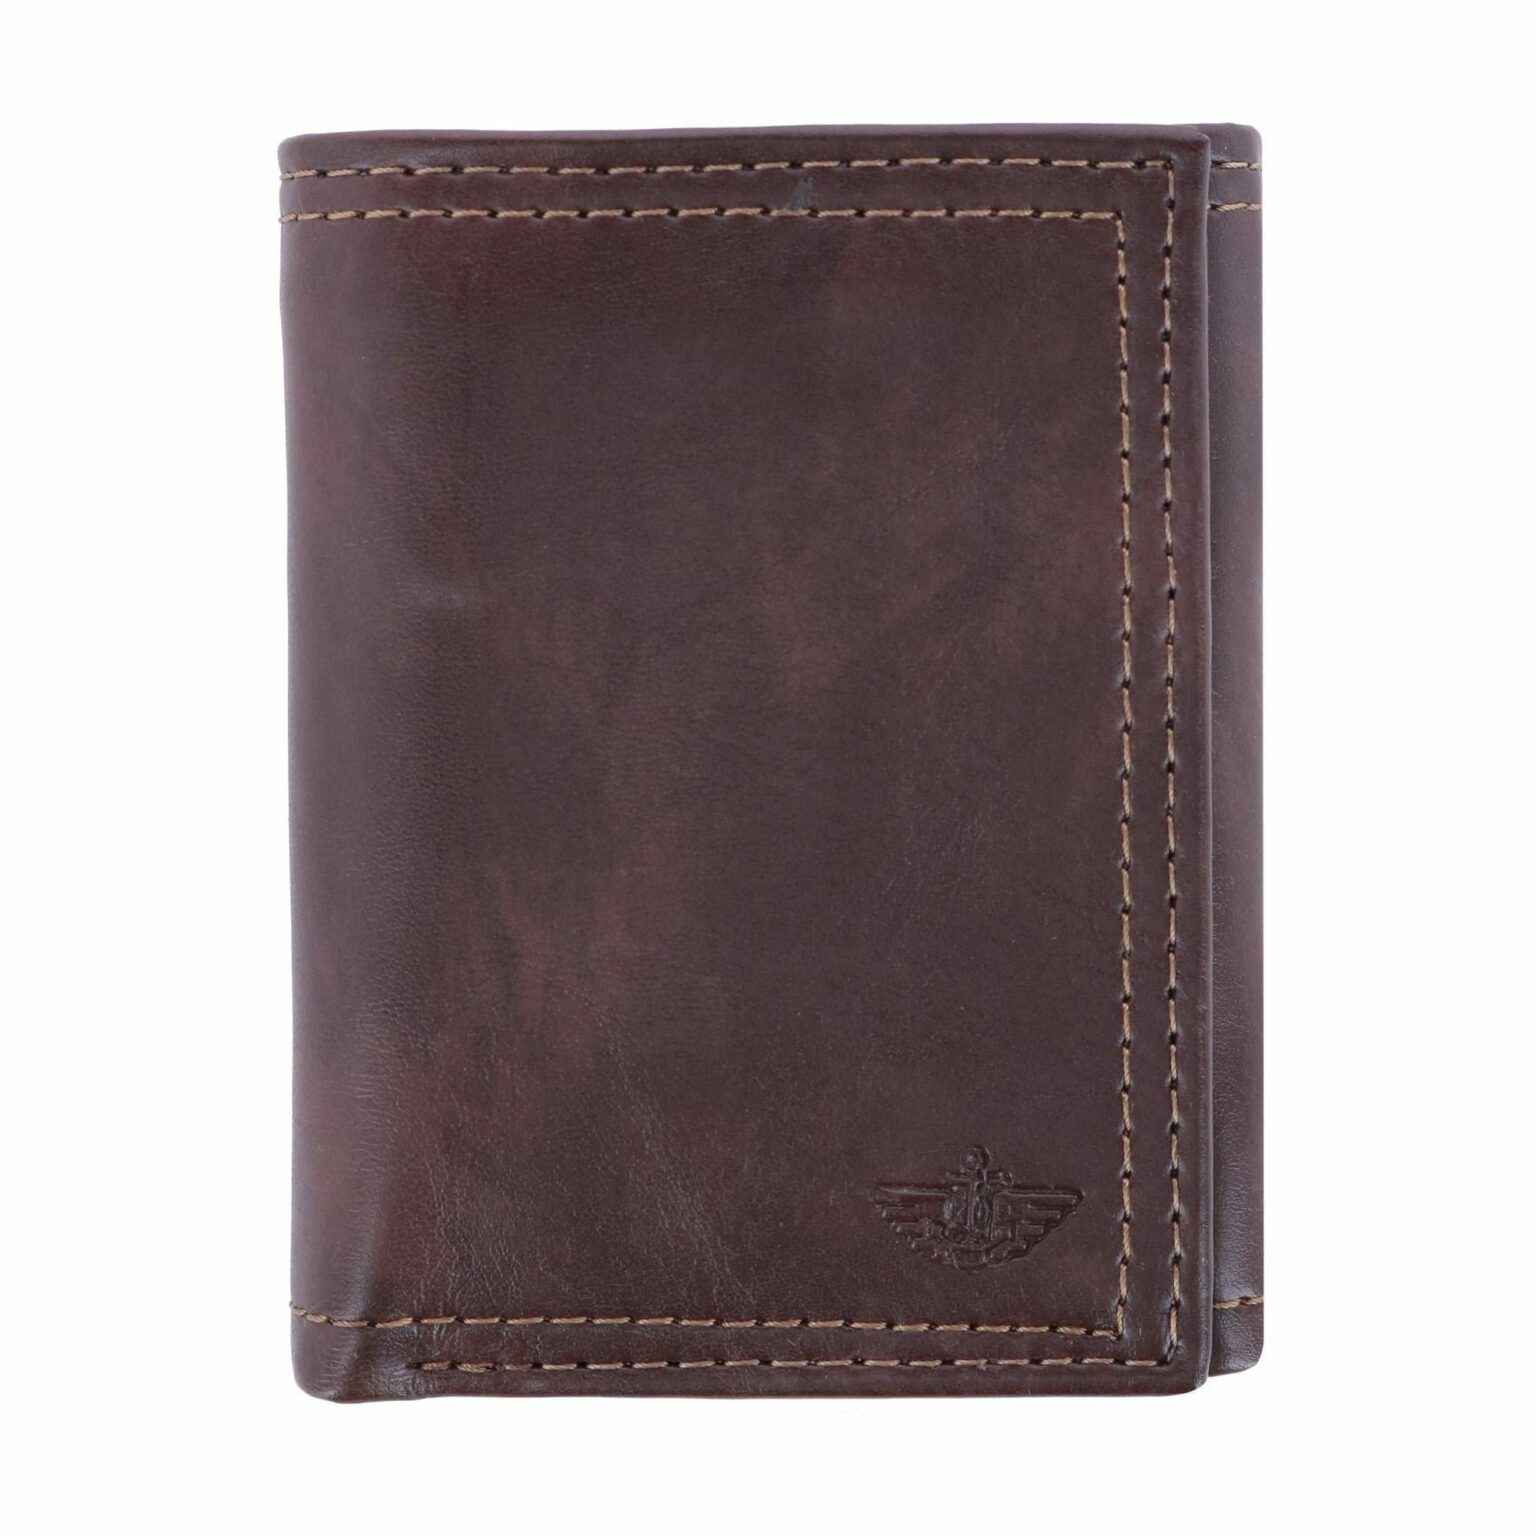 Dockers RFID Security Blocking Wallet trifold